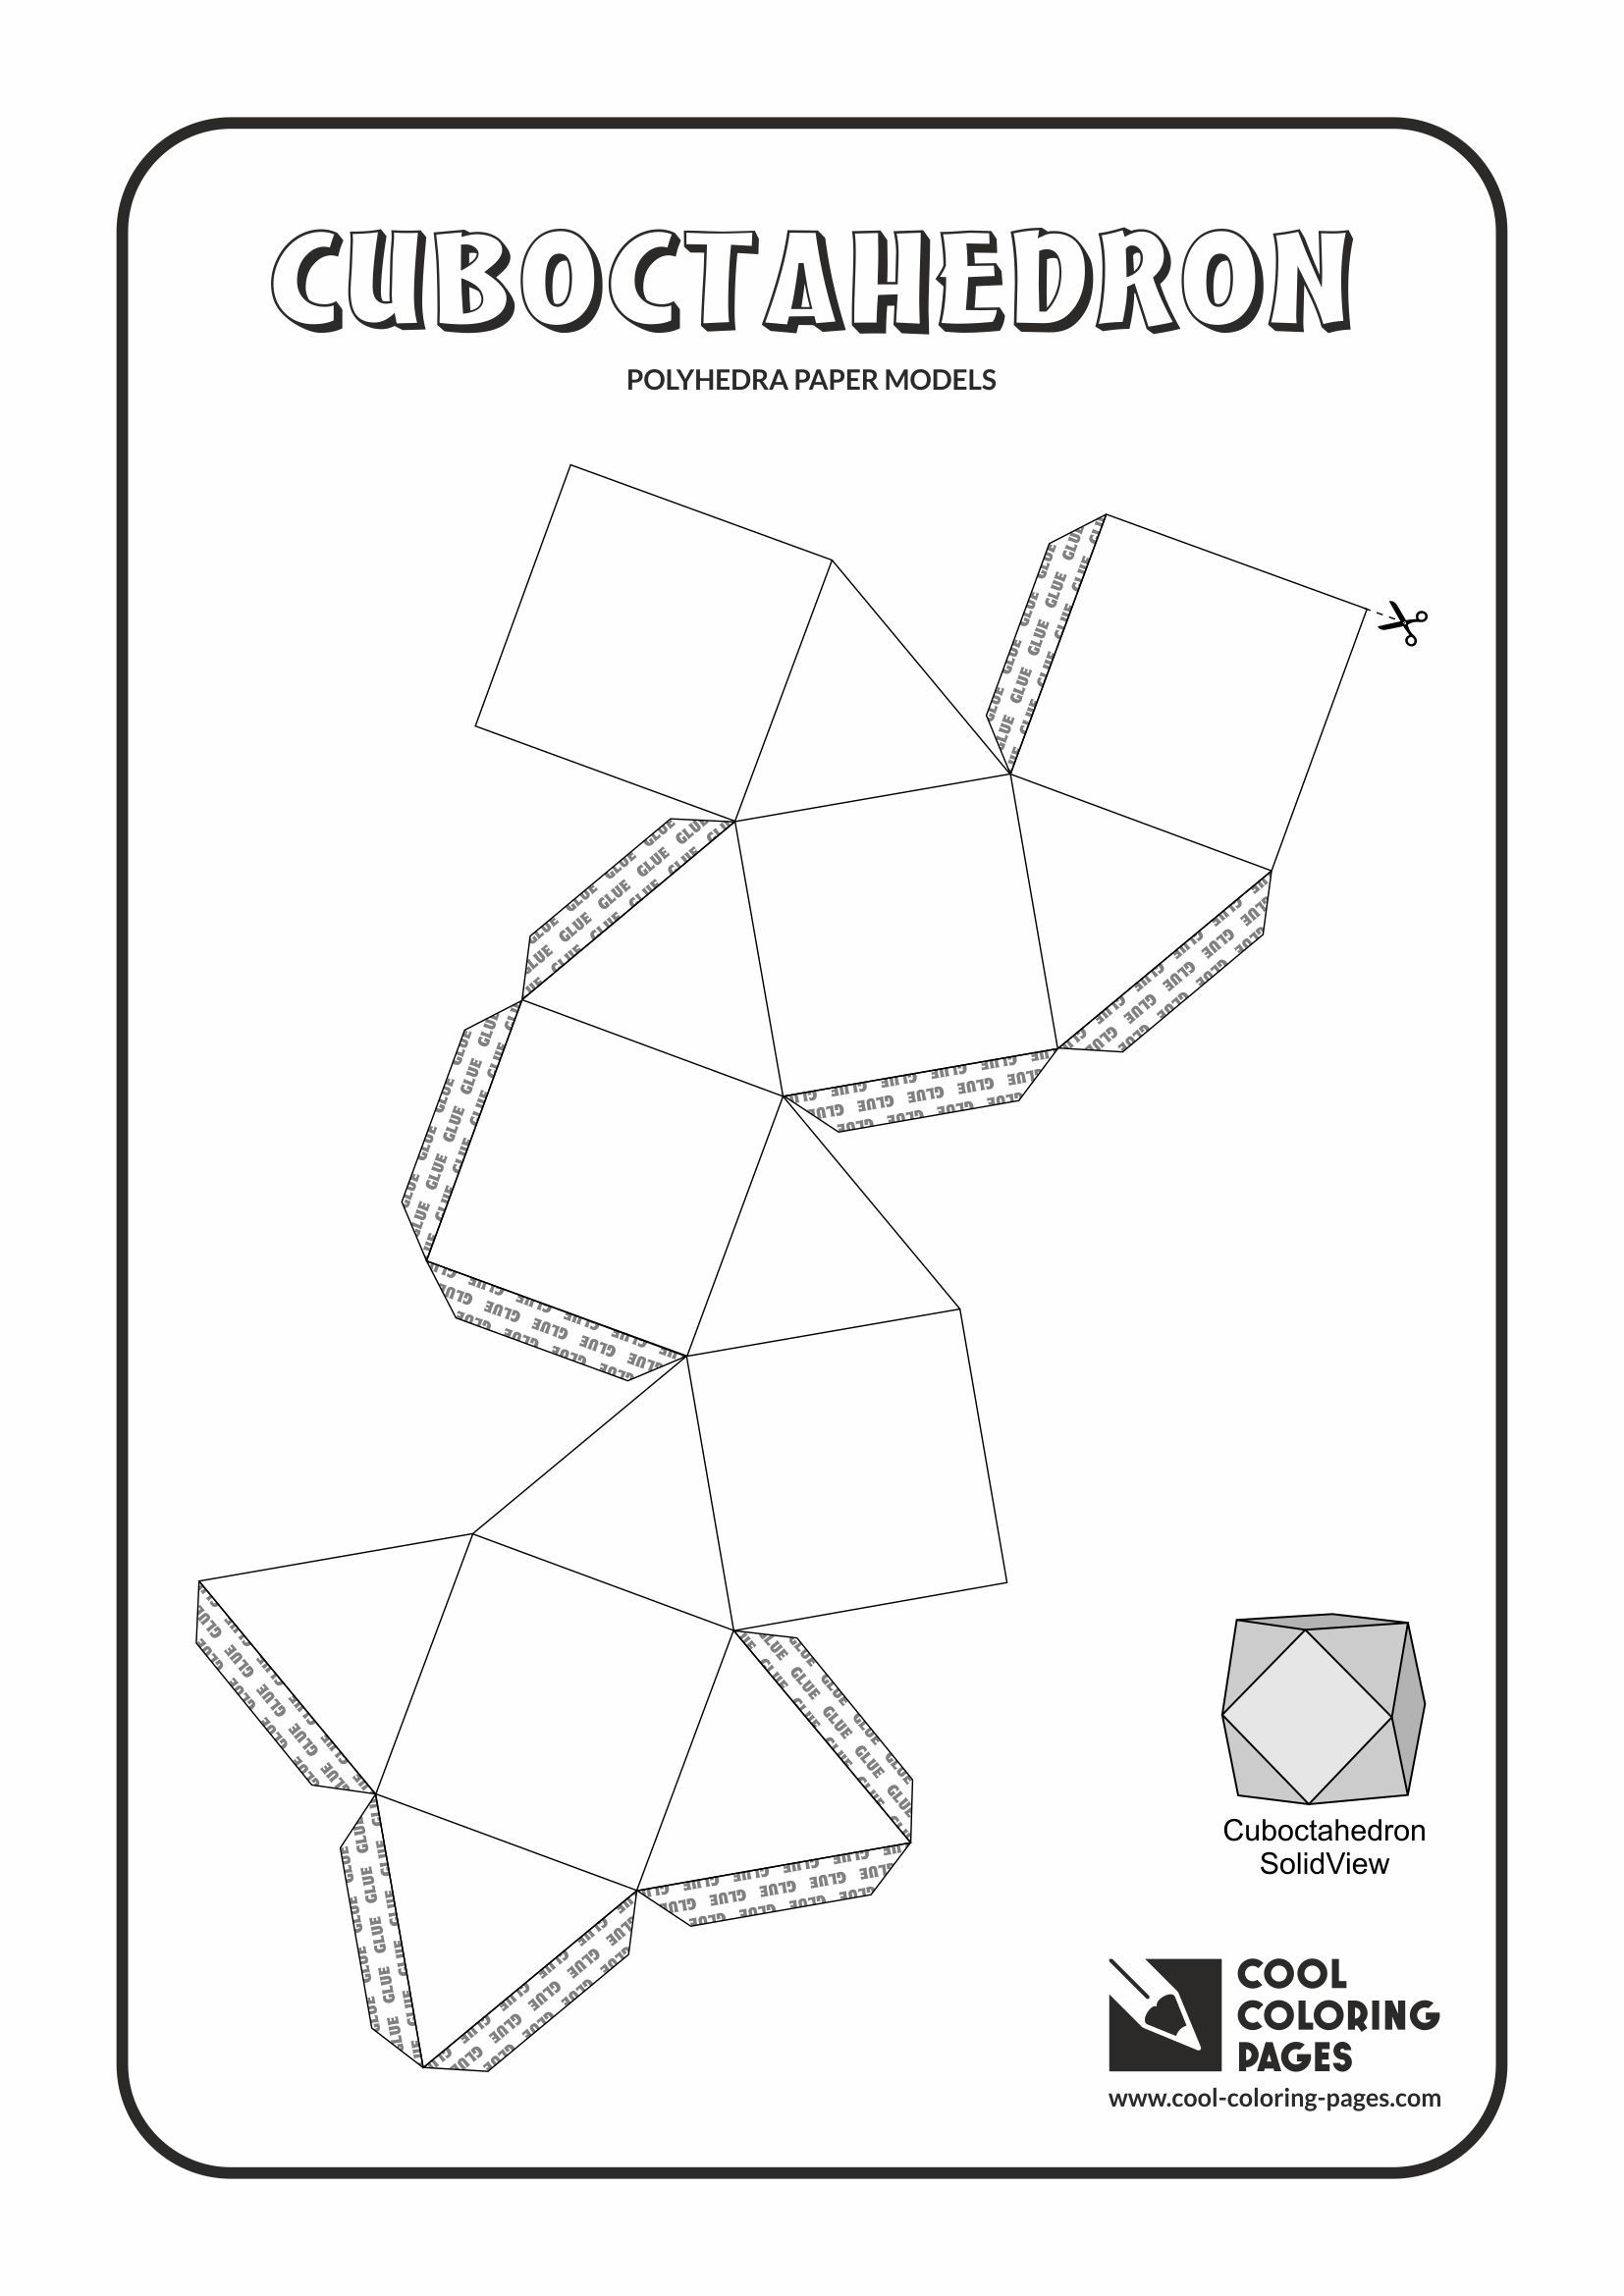 Cool Coloring Pages - Paper models of polyhedra / Paper solids models / Cuboctahedron